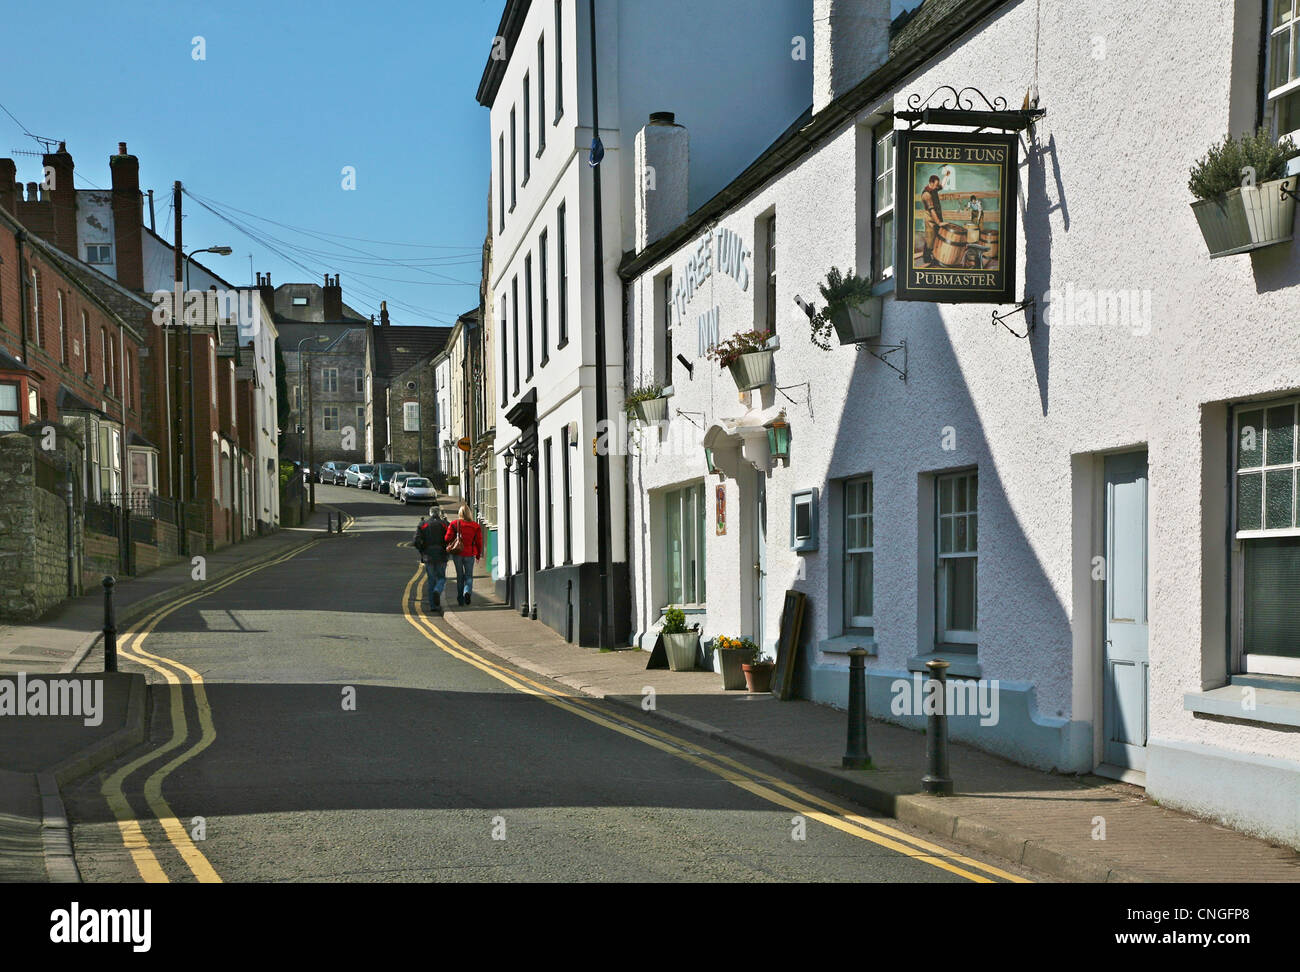 Cottages And Pubs In Bridge Street Close To The Ancient Castle At